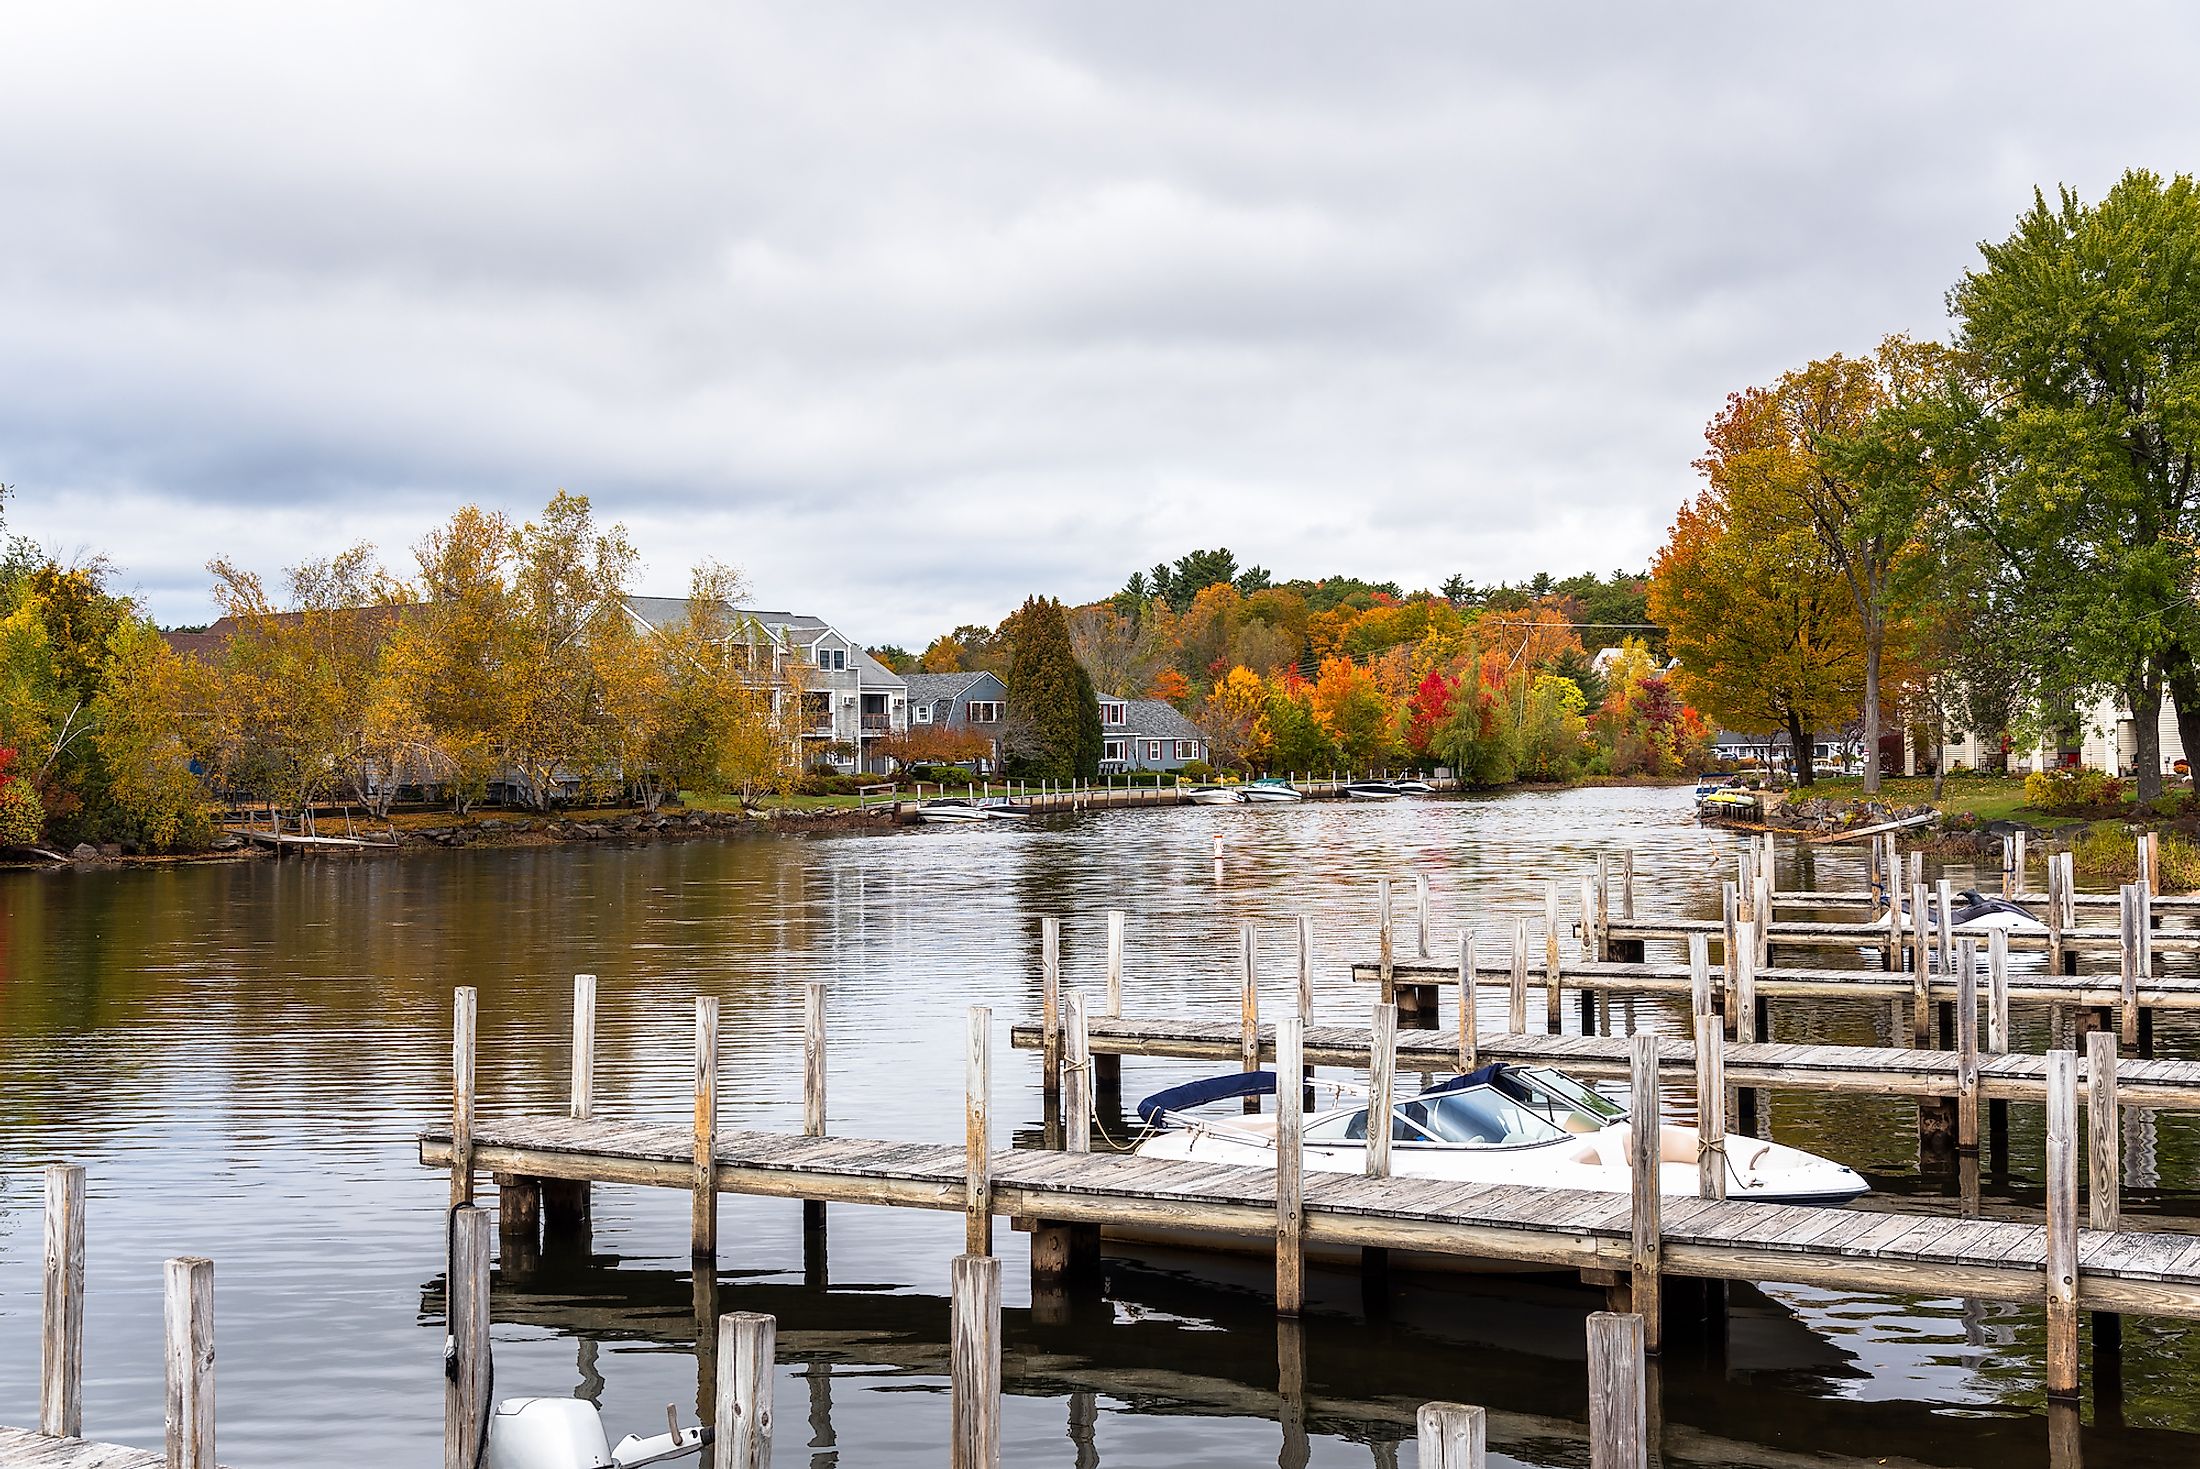 Colorful autumnal trees on river bank in Wolfeboro, New Hampshire, US.